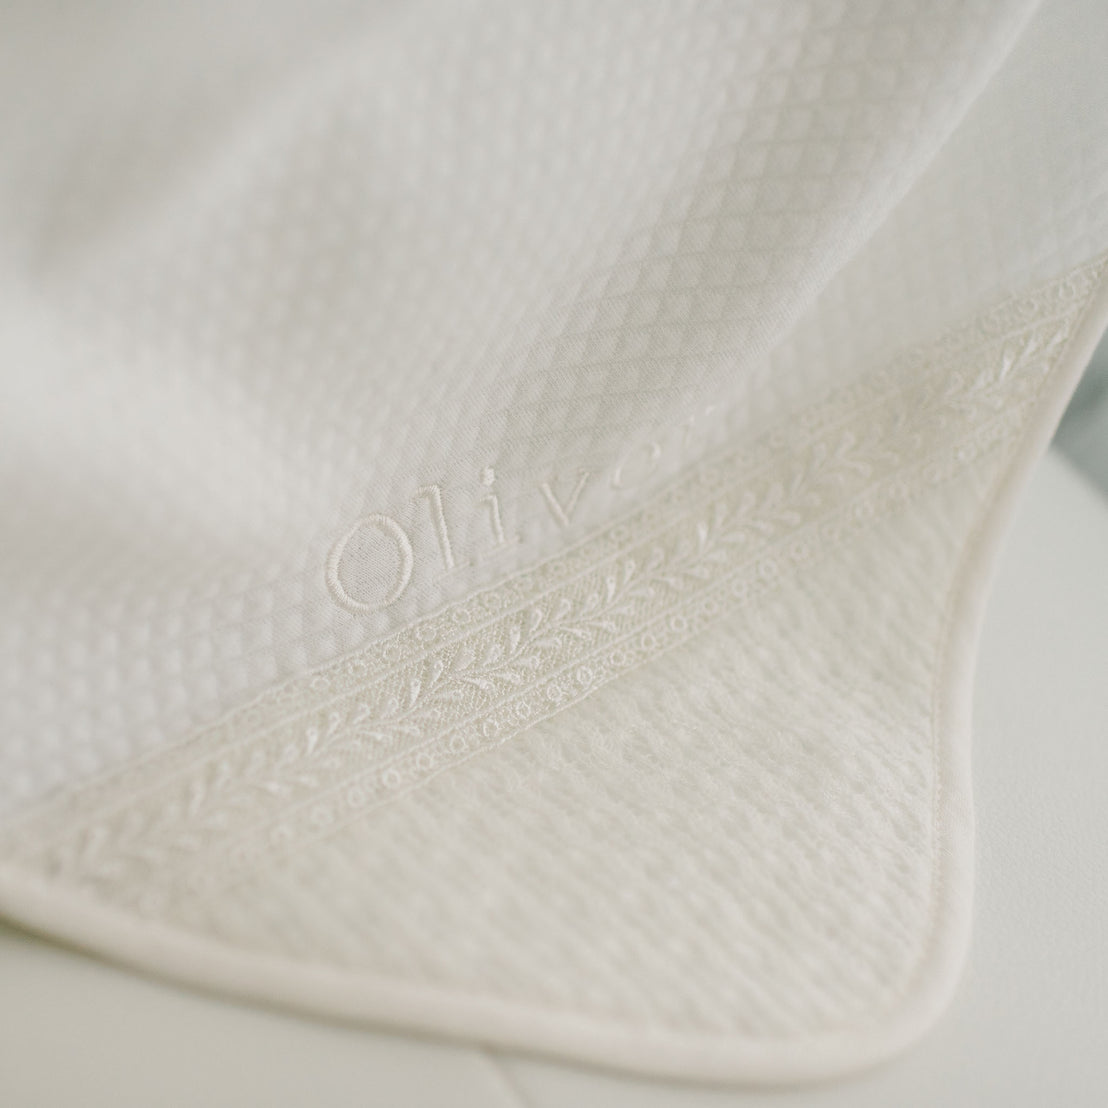 A close-up image of the ivory Oliver Personalized Blanket featuring the ivory, textured cotton fabric with delicate embroidered detailing. The embroidery includes the name "Oliver" and intricate, leafy patterns along the trim.